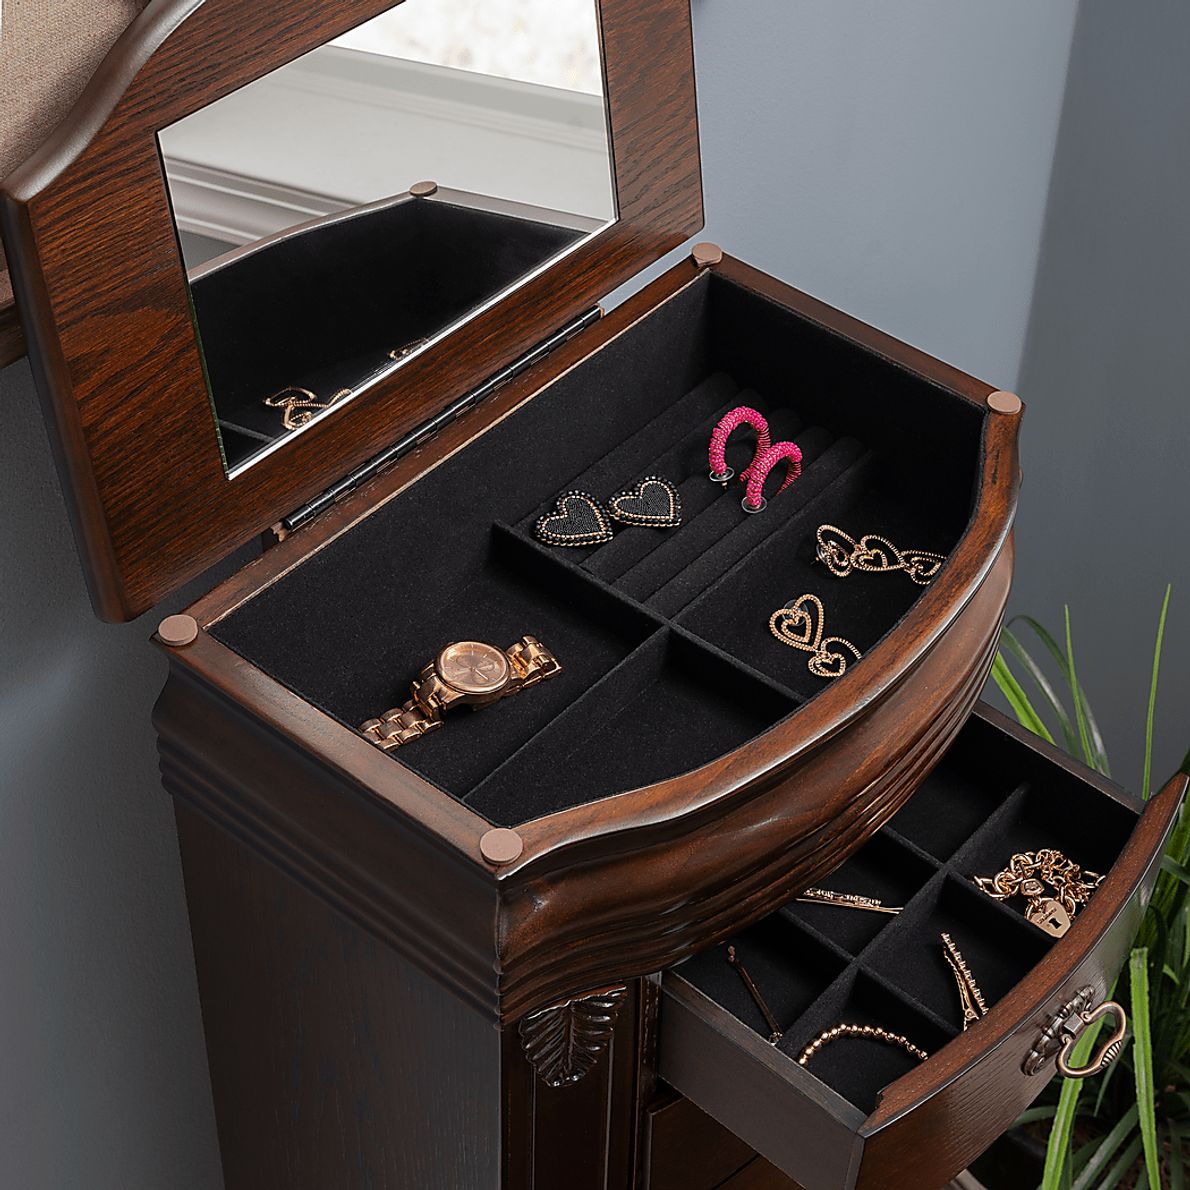 Jonquill Brown Jewelry Armoire